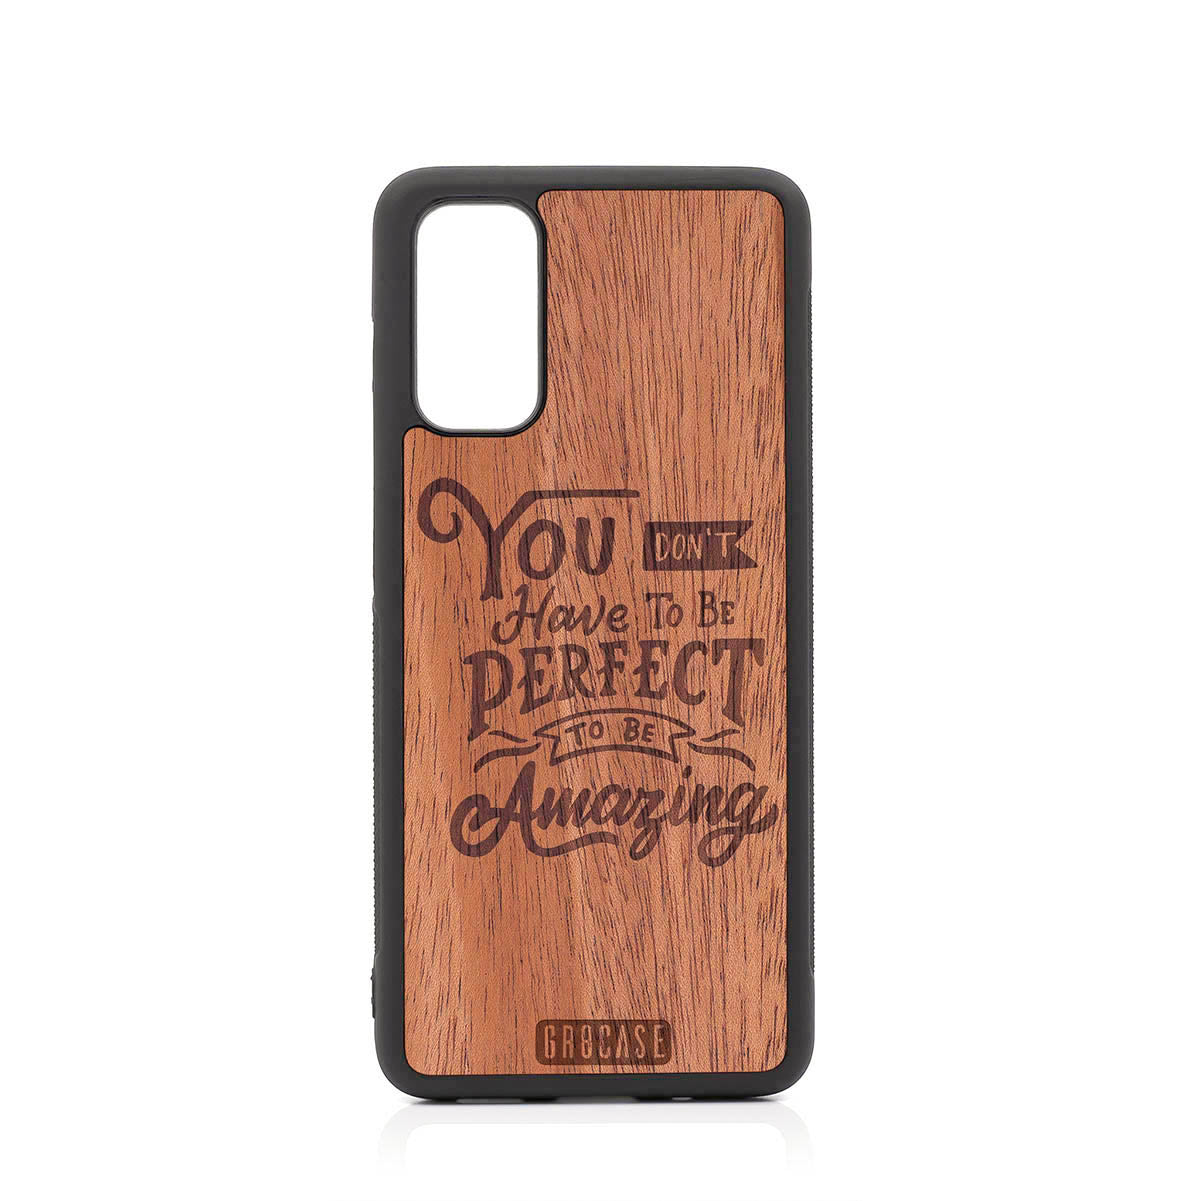 You Don't Have To Be Perfect To Be Amazing Design Wood Case For Samsung Galaxy S20